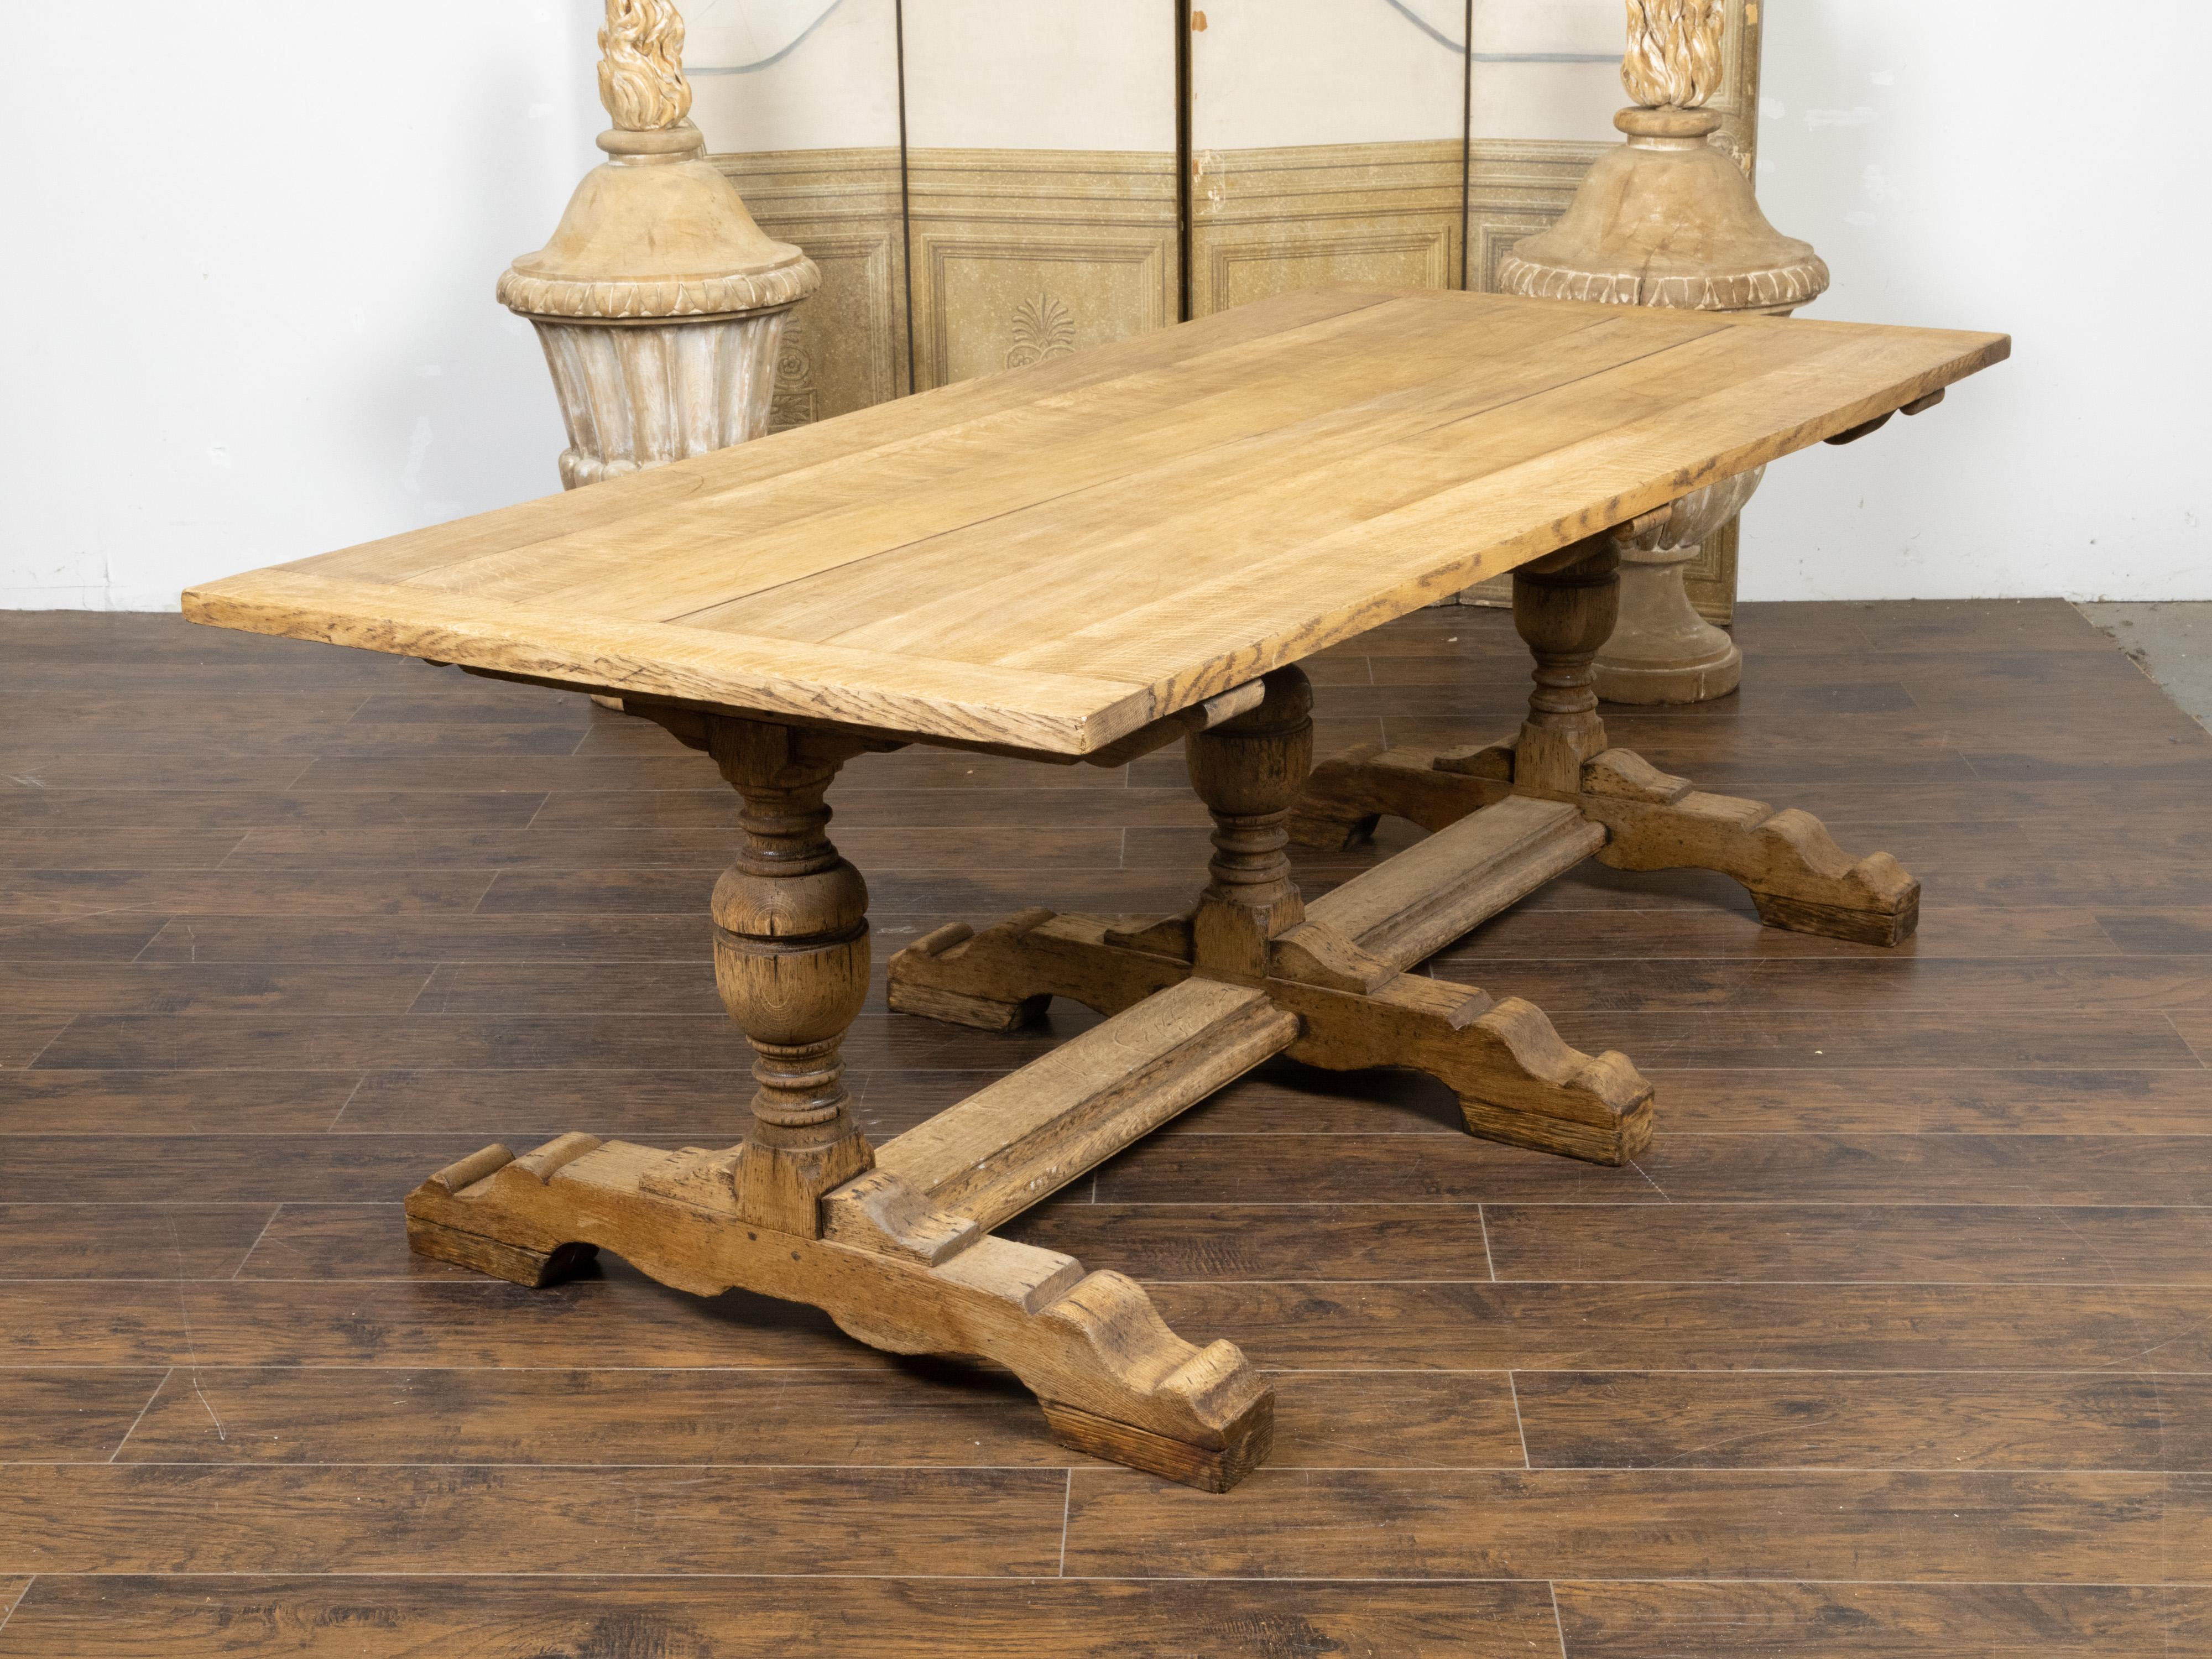 A French bleached oak farm table from the 19th century, with trestle base, baluster legs and weathered patina. Created in France during the 19th century, this bleached oak farm table features a rectangular planked top sitting above an elegant